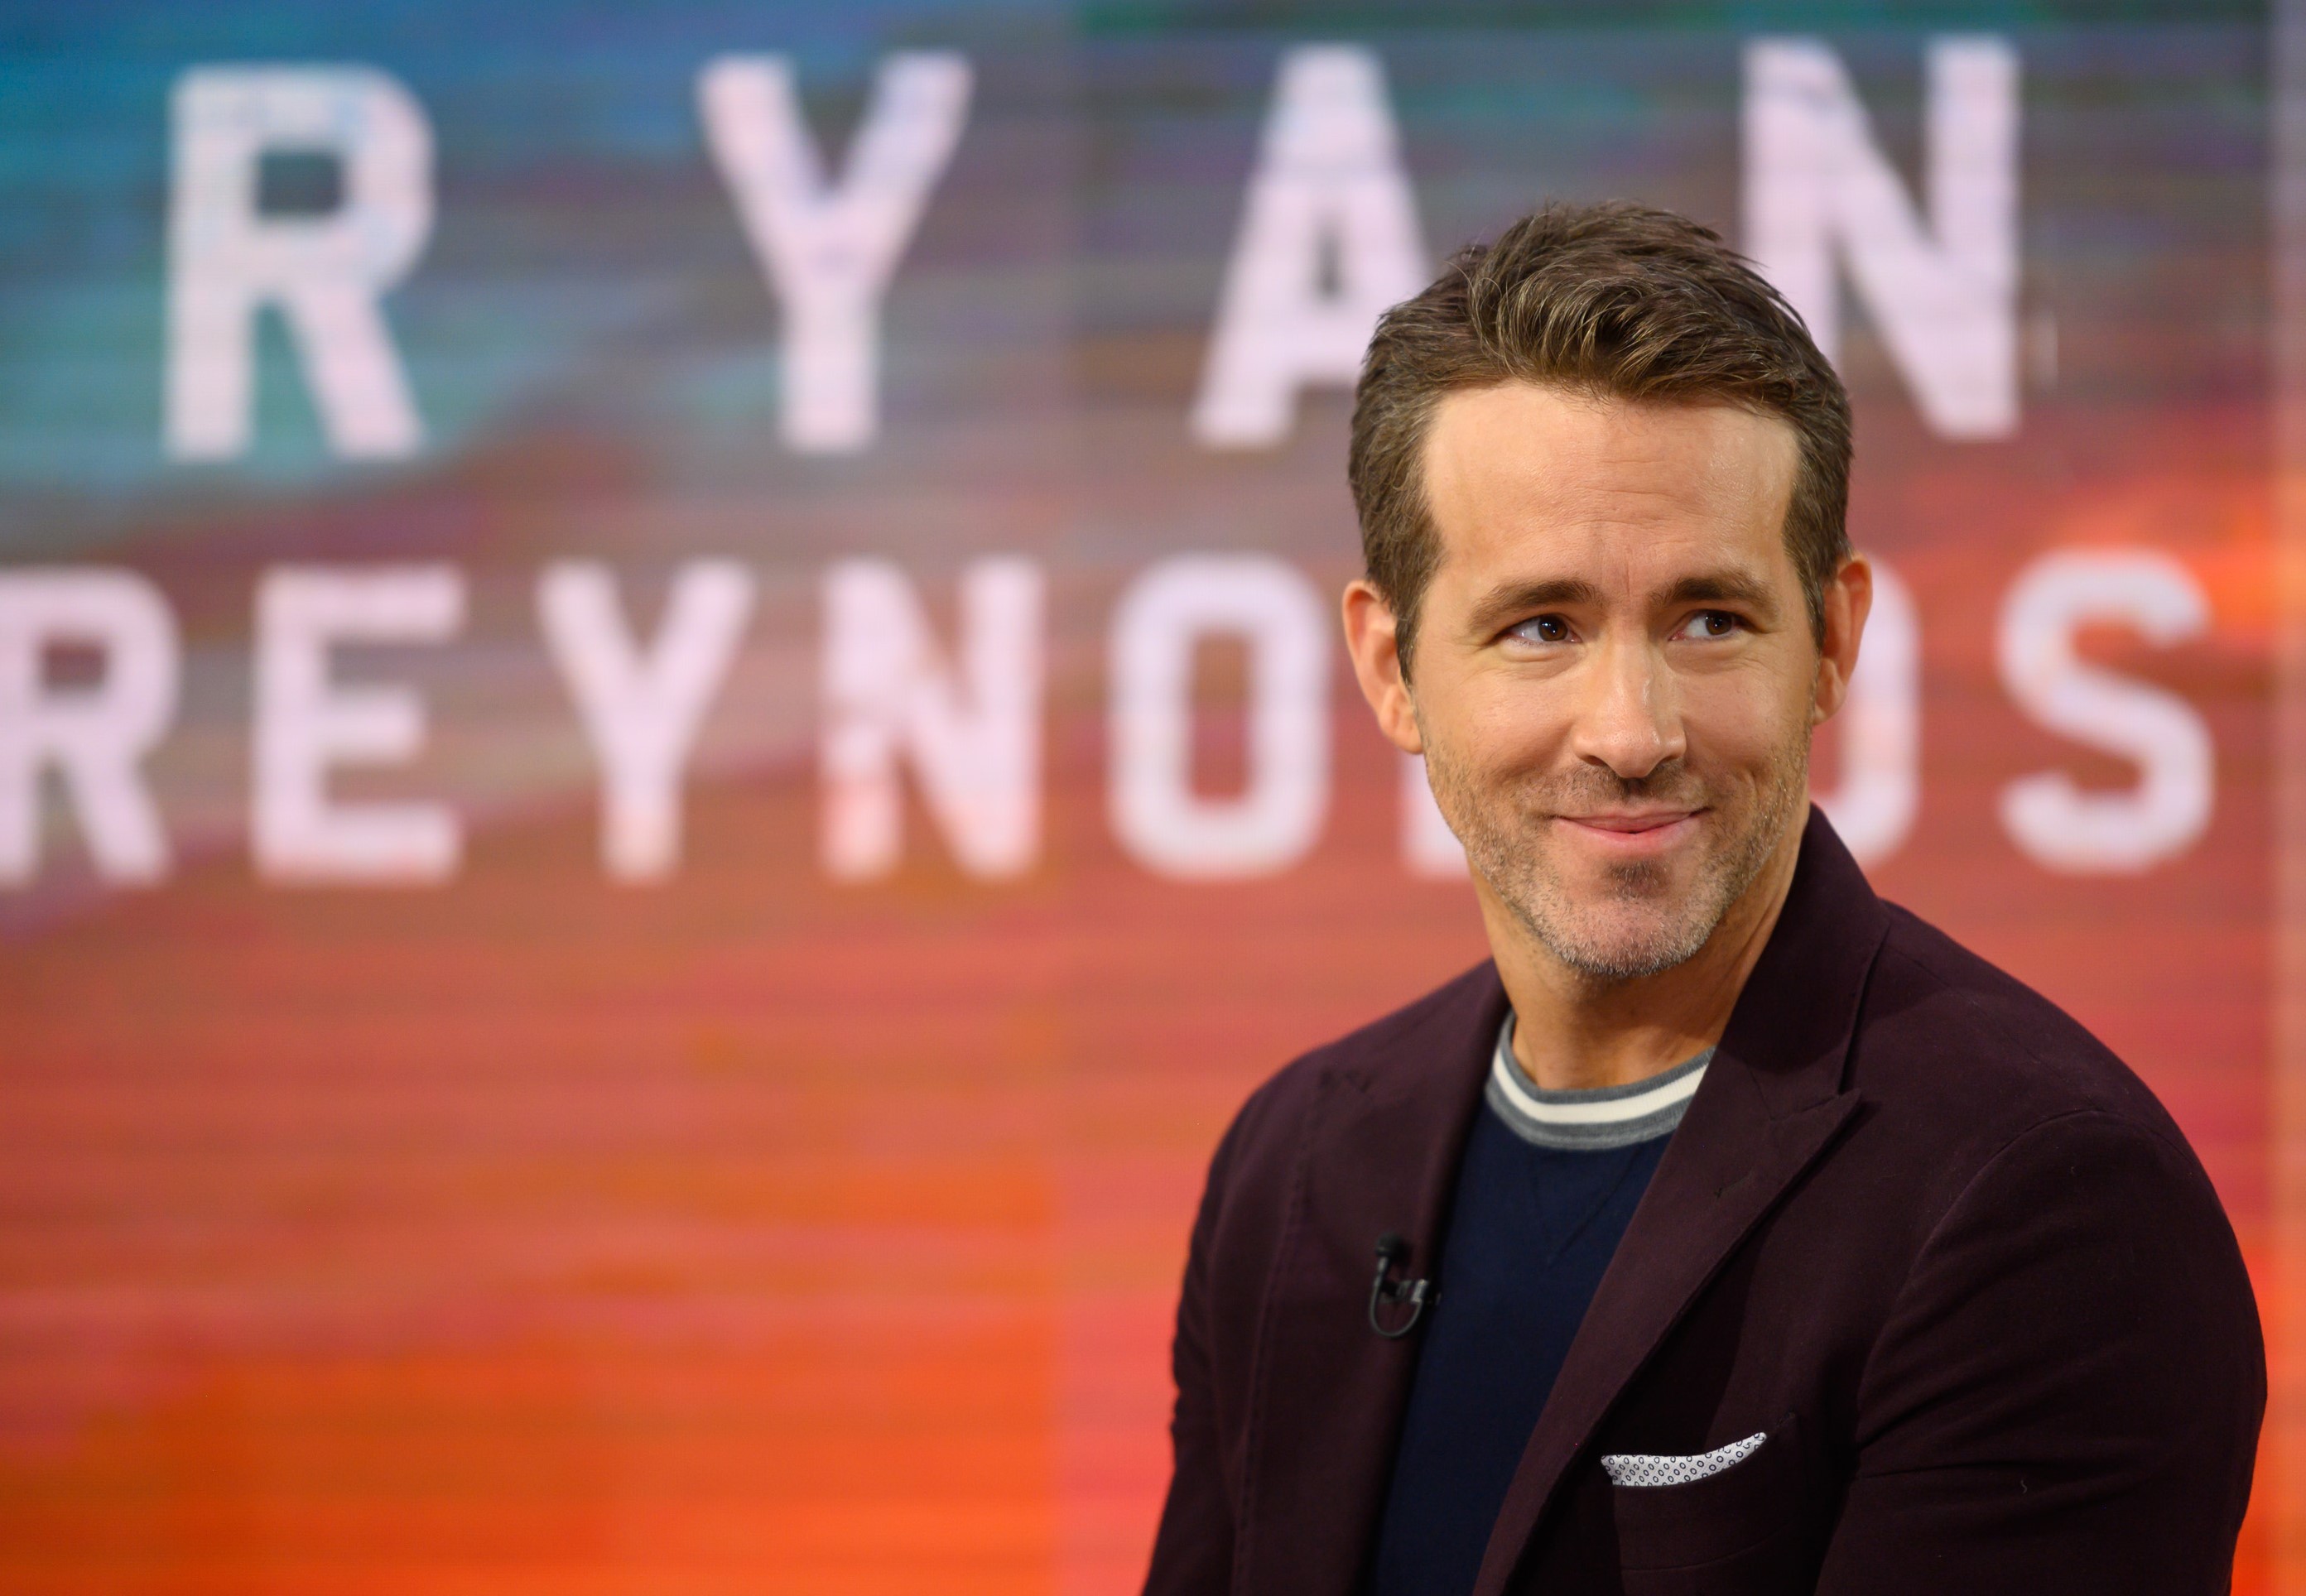 Ryan Reynolds smiling on the set of Today Show in 2019